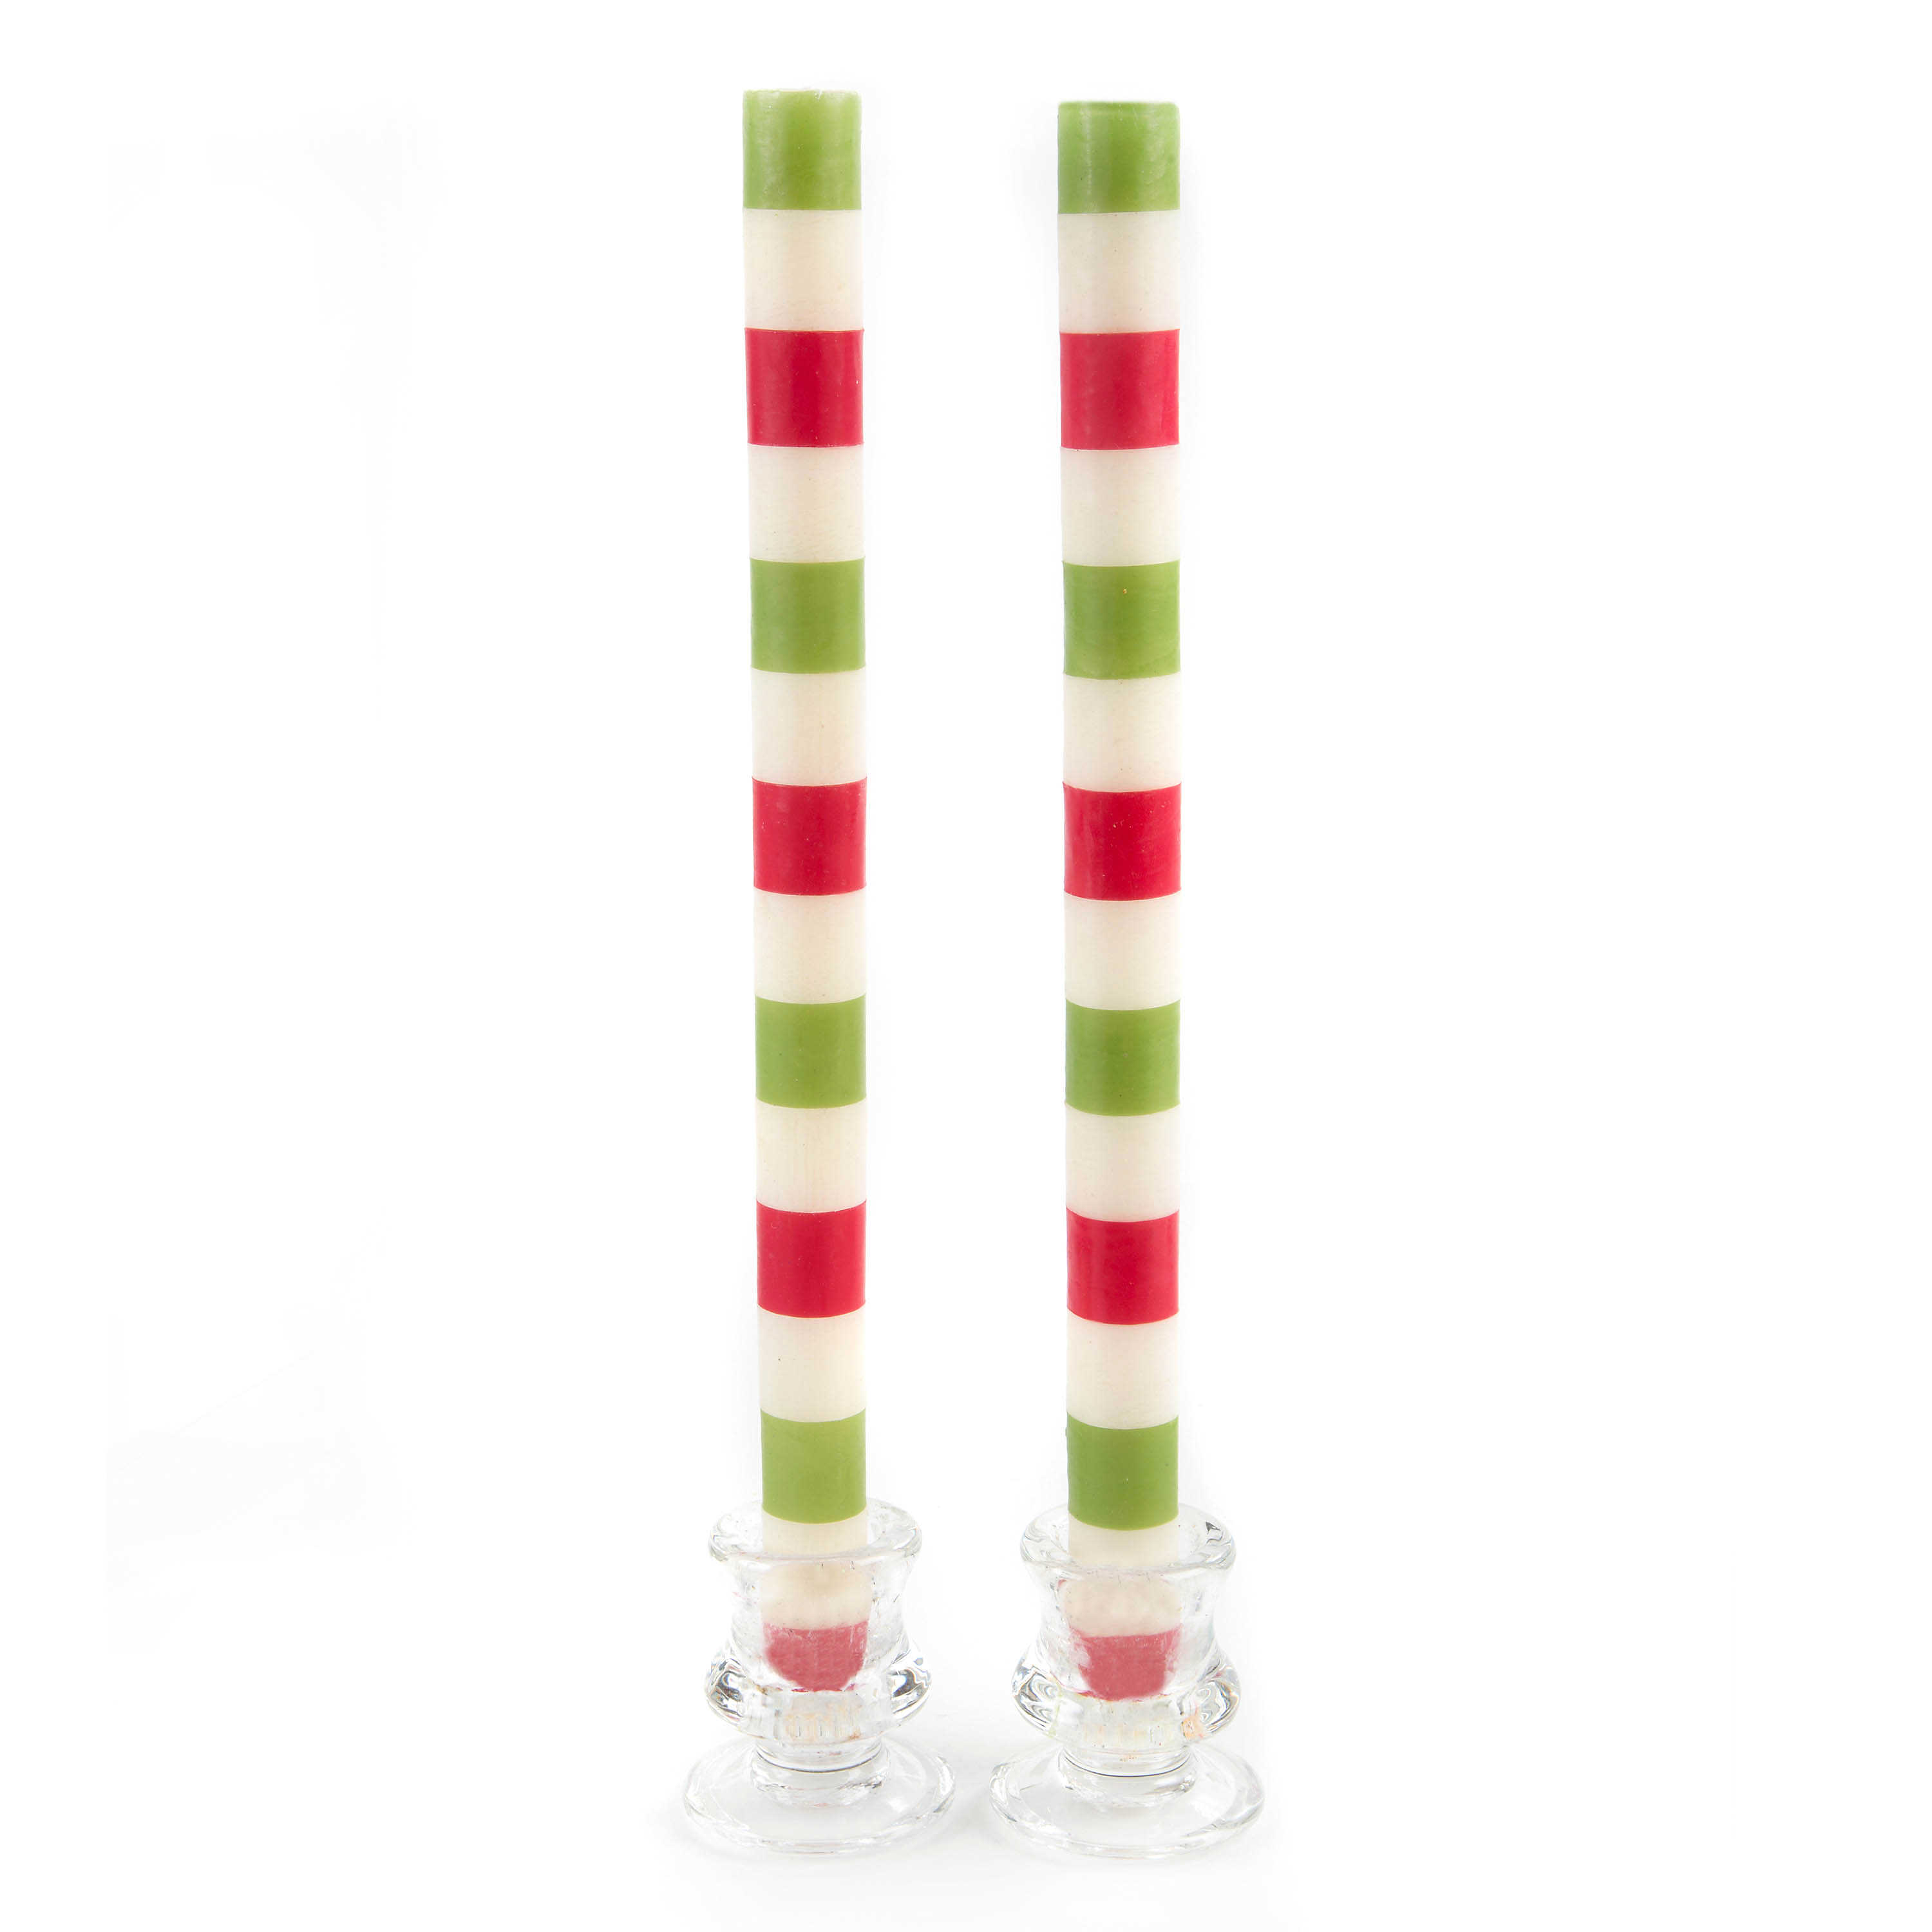 Multi Bands Dinner Candles - Red & Green - Set of 2 mackenzie-childs Panama 0